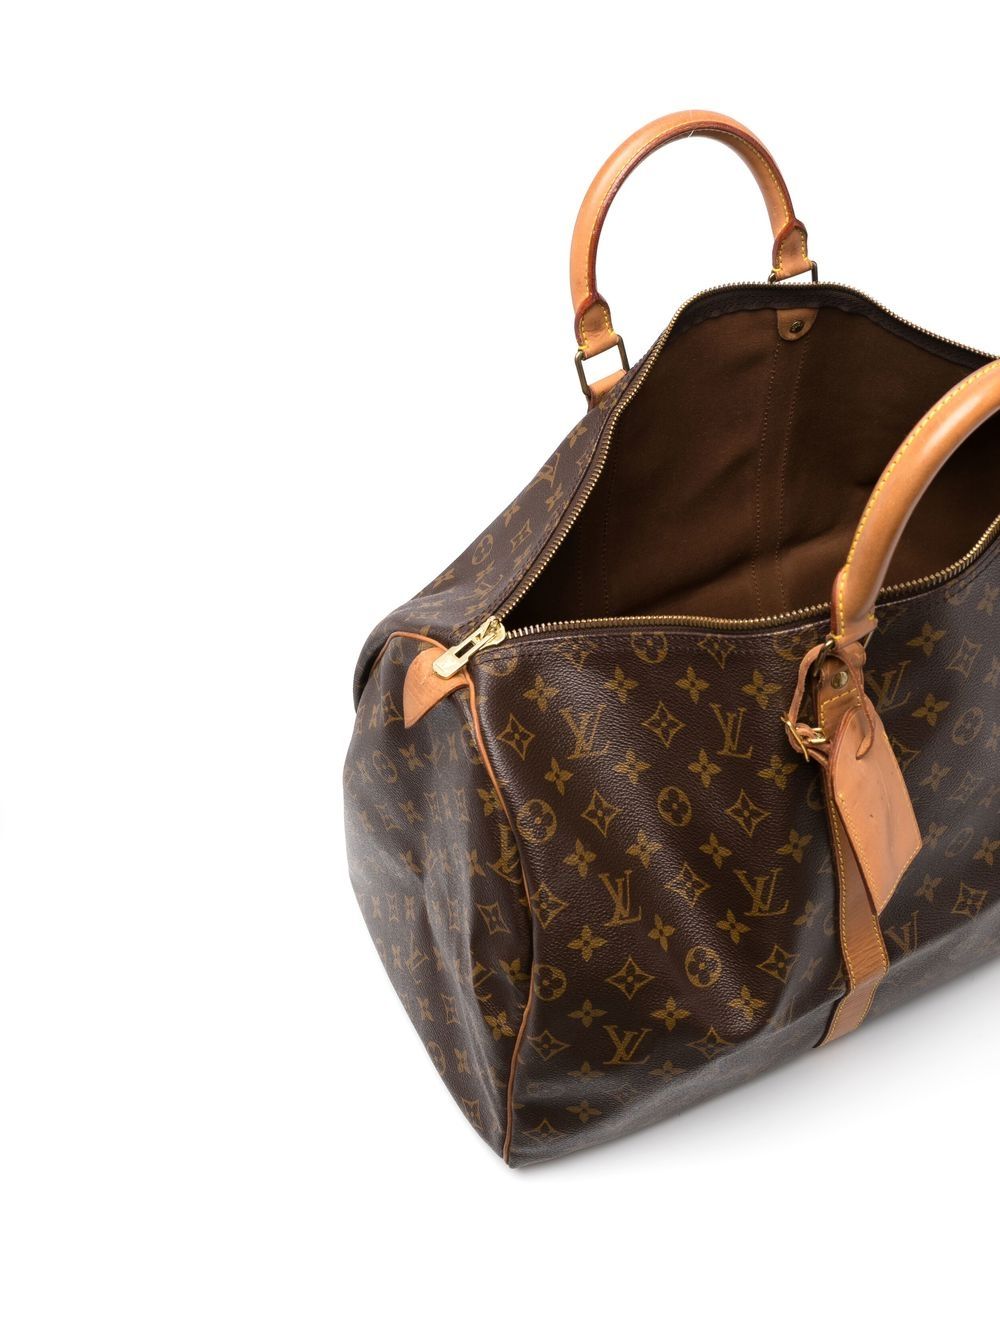 Louis Vuitton Keepall 45 Bandouliere from 1999. This item is only